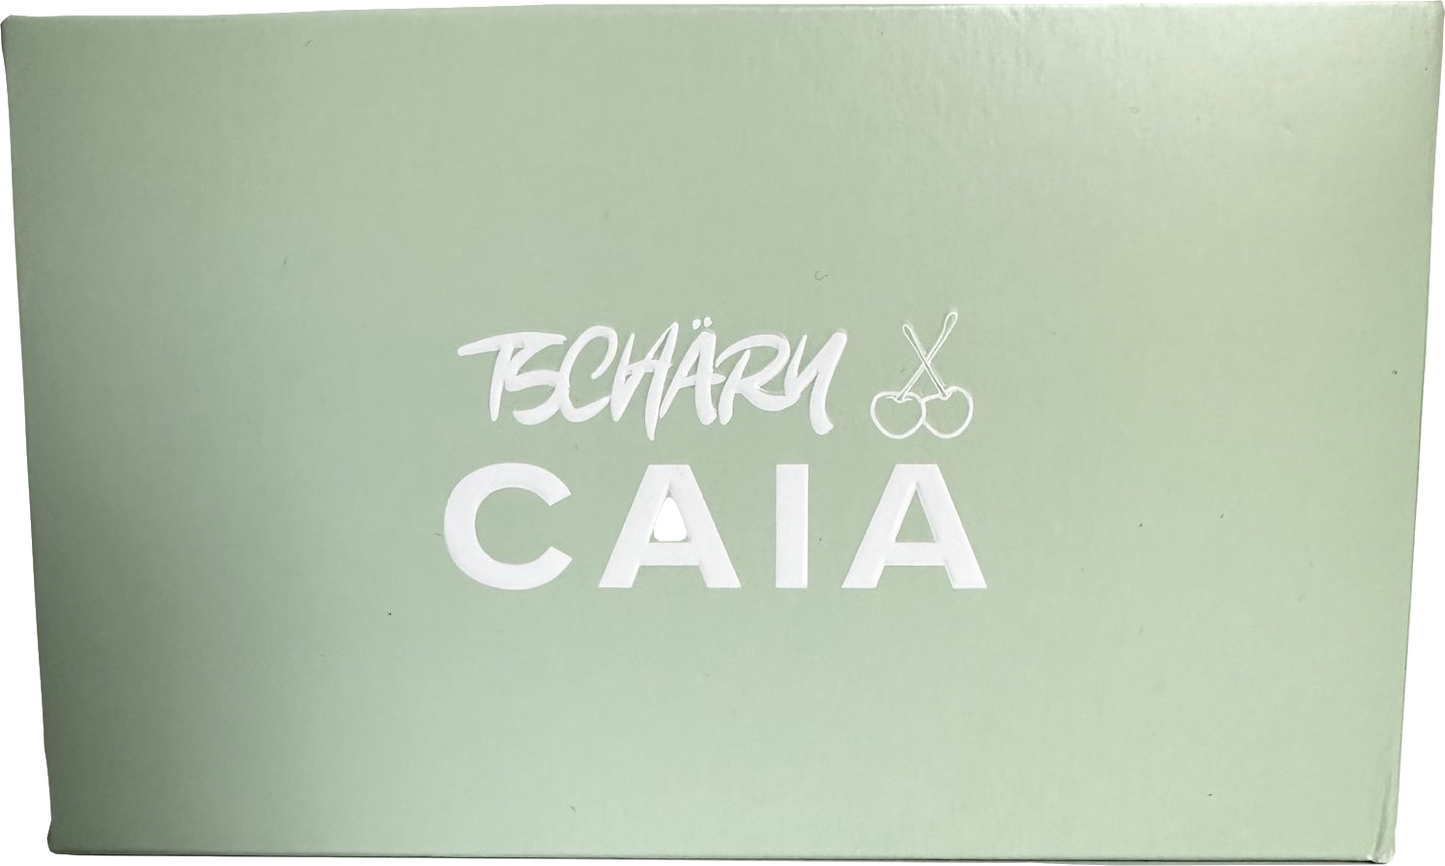 caia Tschäry Palette one size